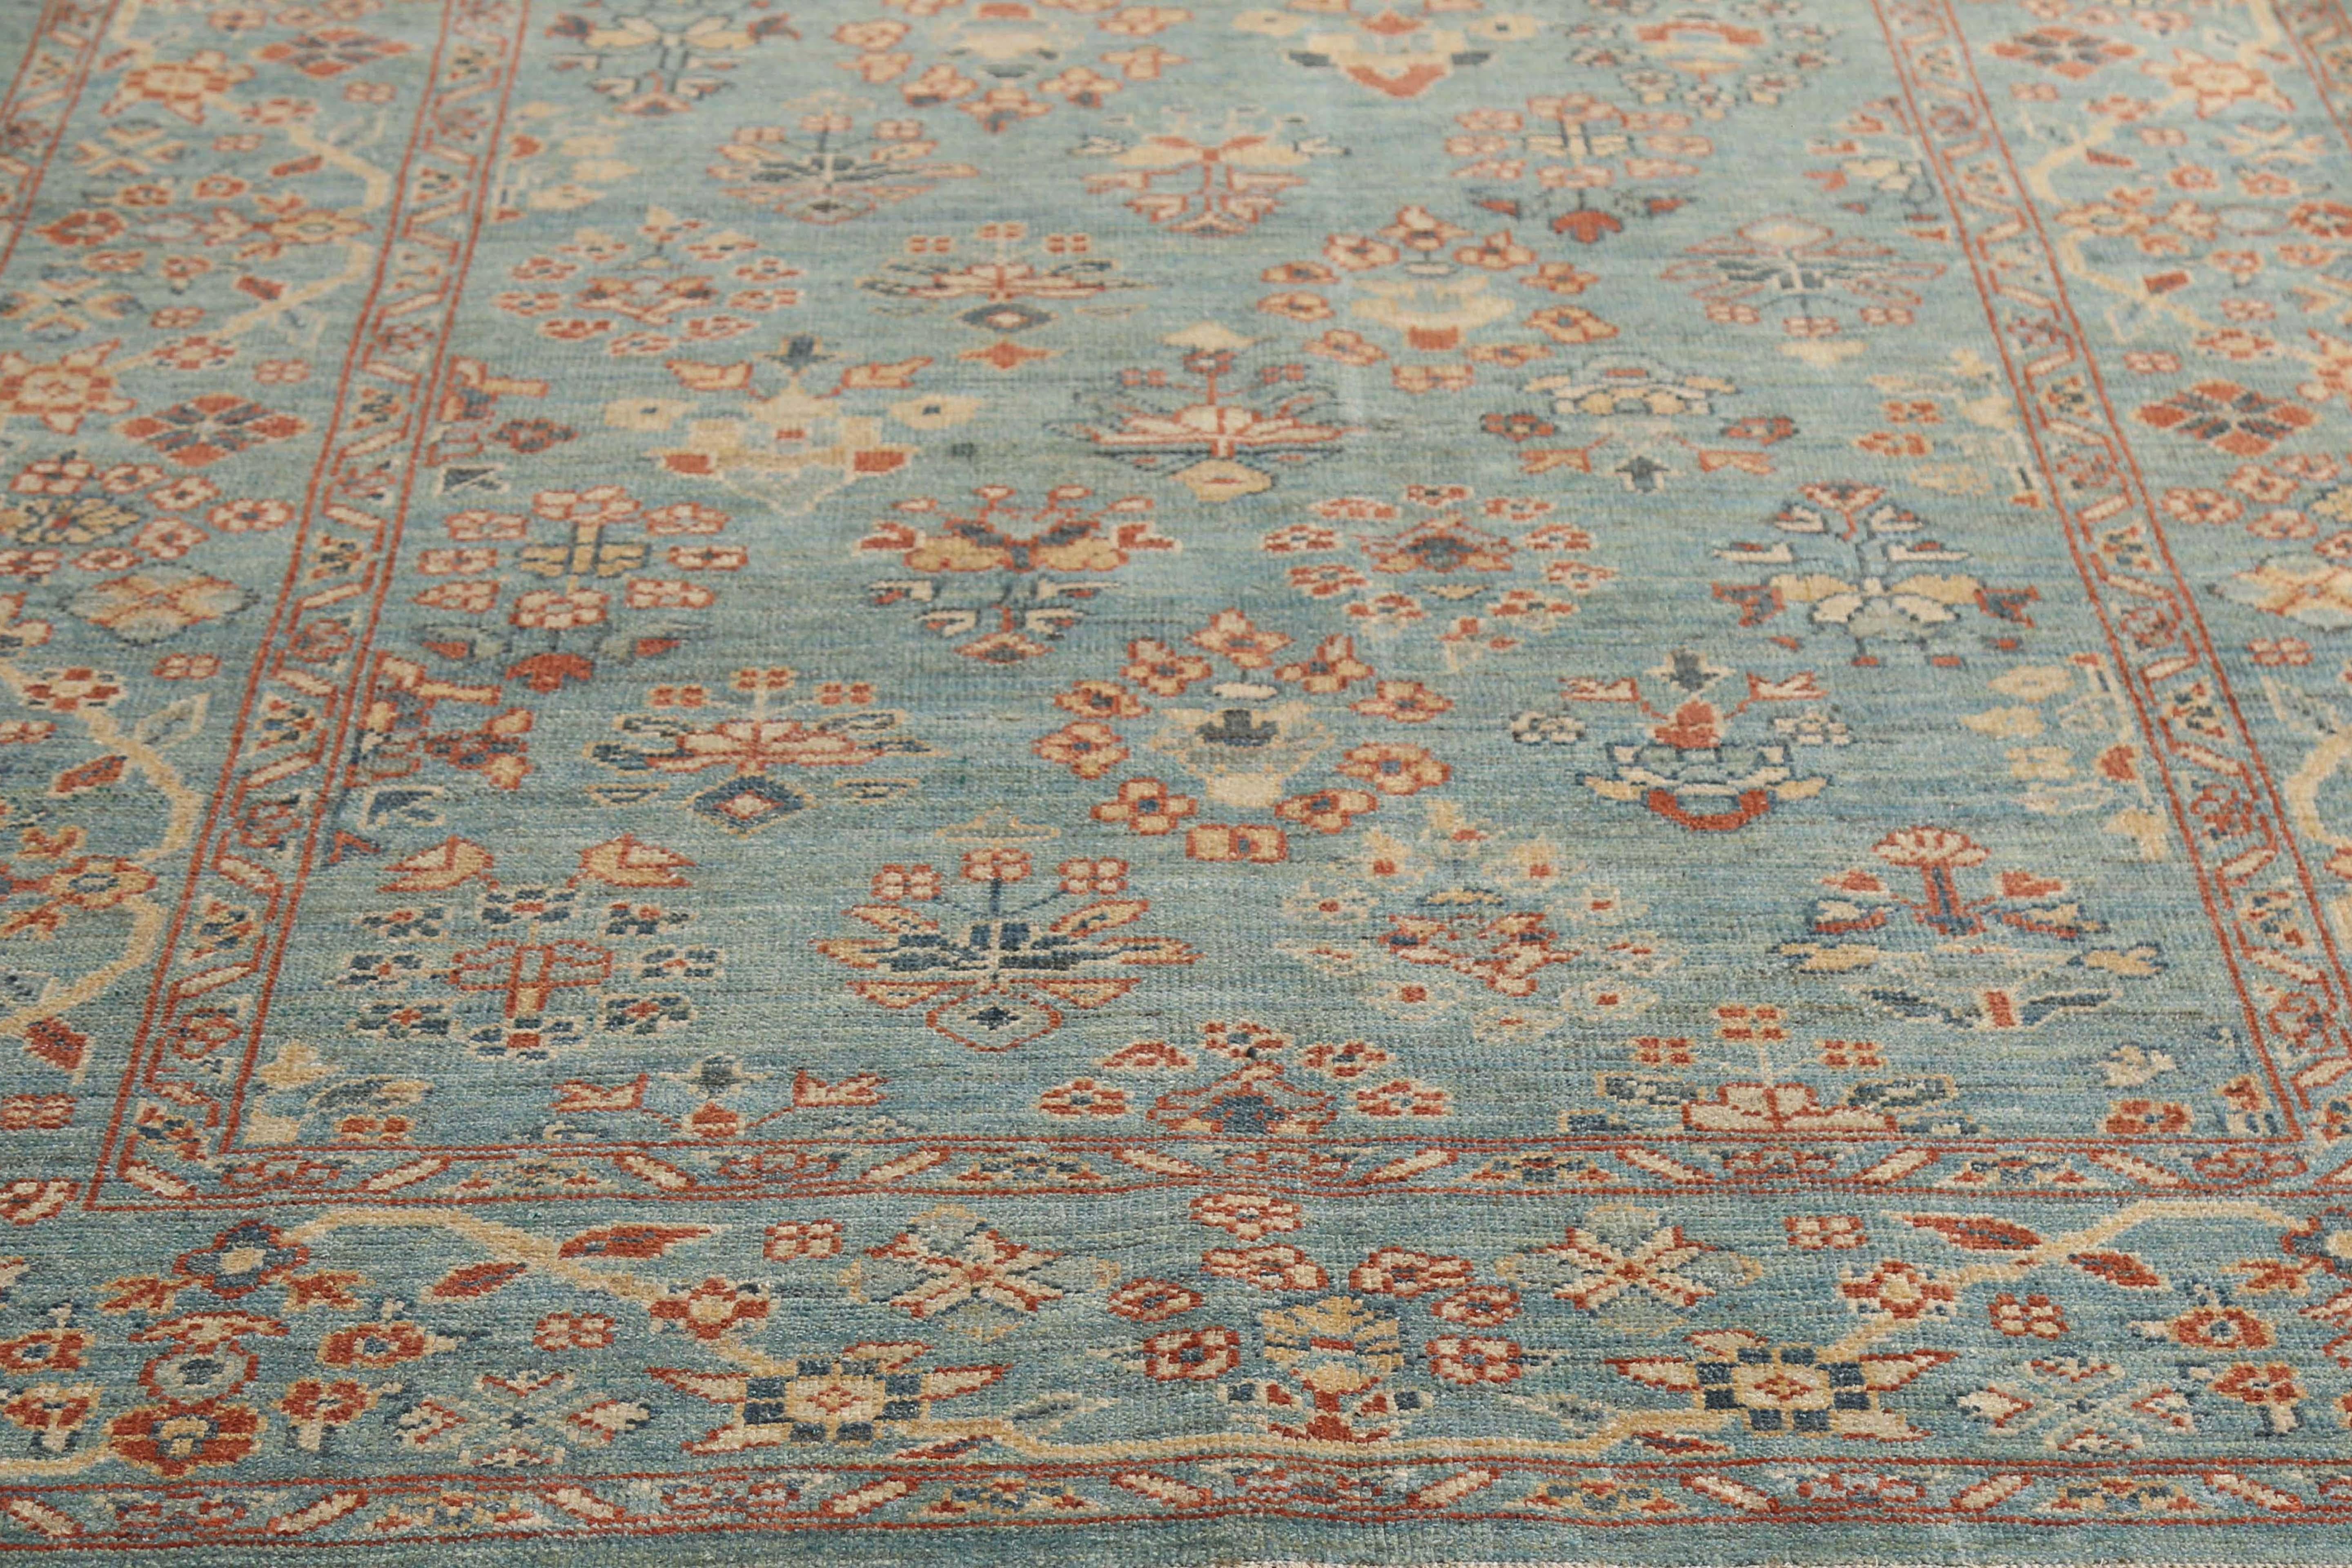 Introducing our exquisite handmade Turkish Sultanabad rug, measuring 6'0'' by 9'0''. This stunning rug boasts a beautiful blue background with intricate designs featuring light orange, blue, and navy colors. The traditional design is accentuated by